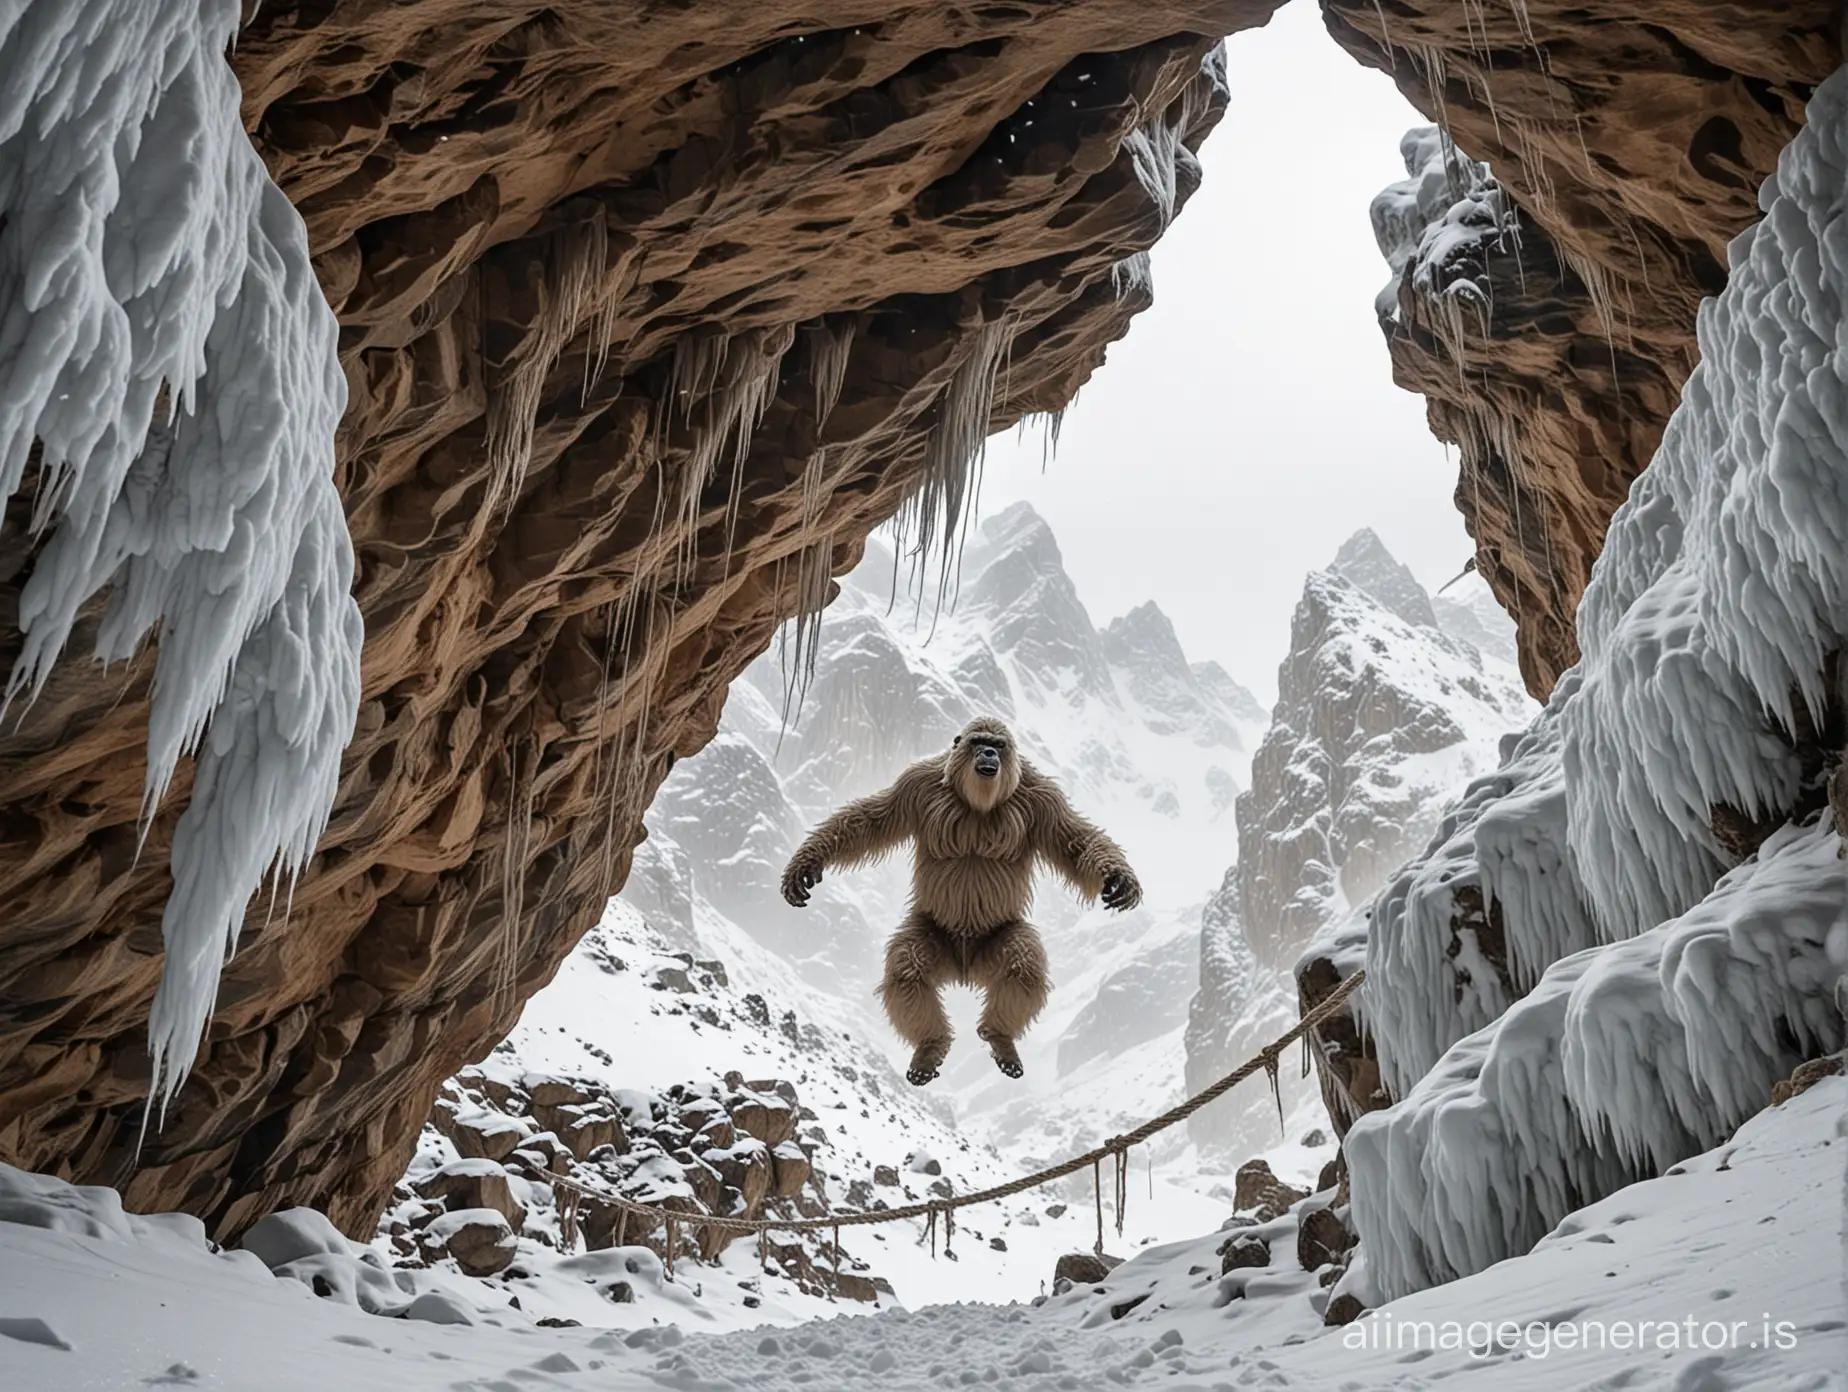 Yeti jumping out of a cave on a snowy mountain pass. rope bridges in the background